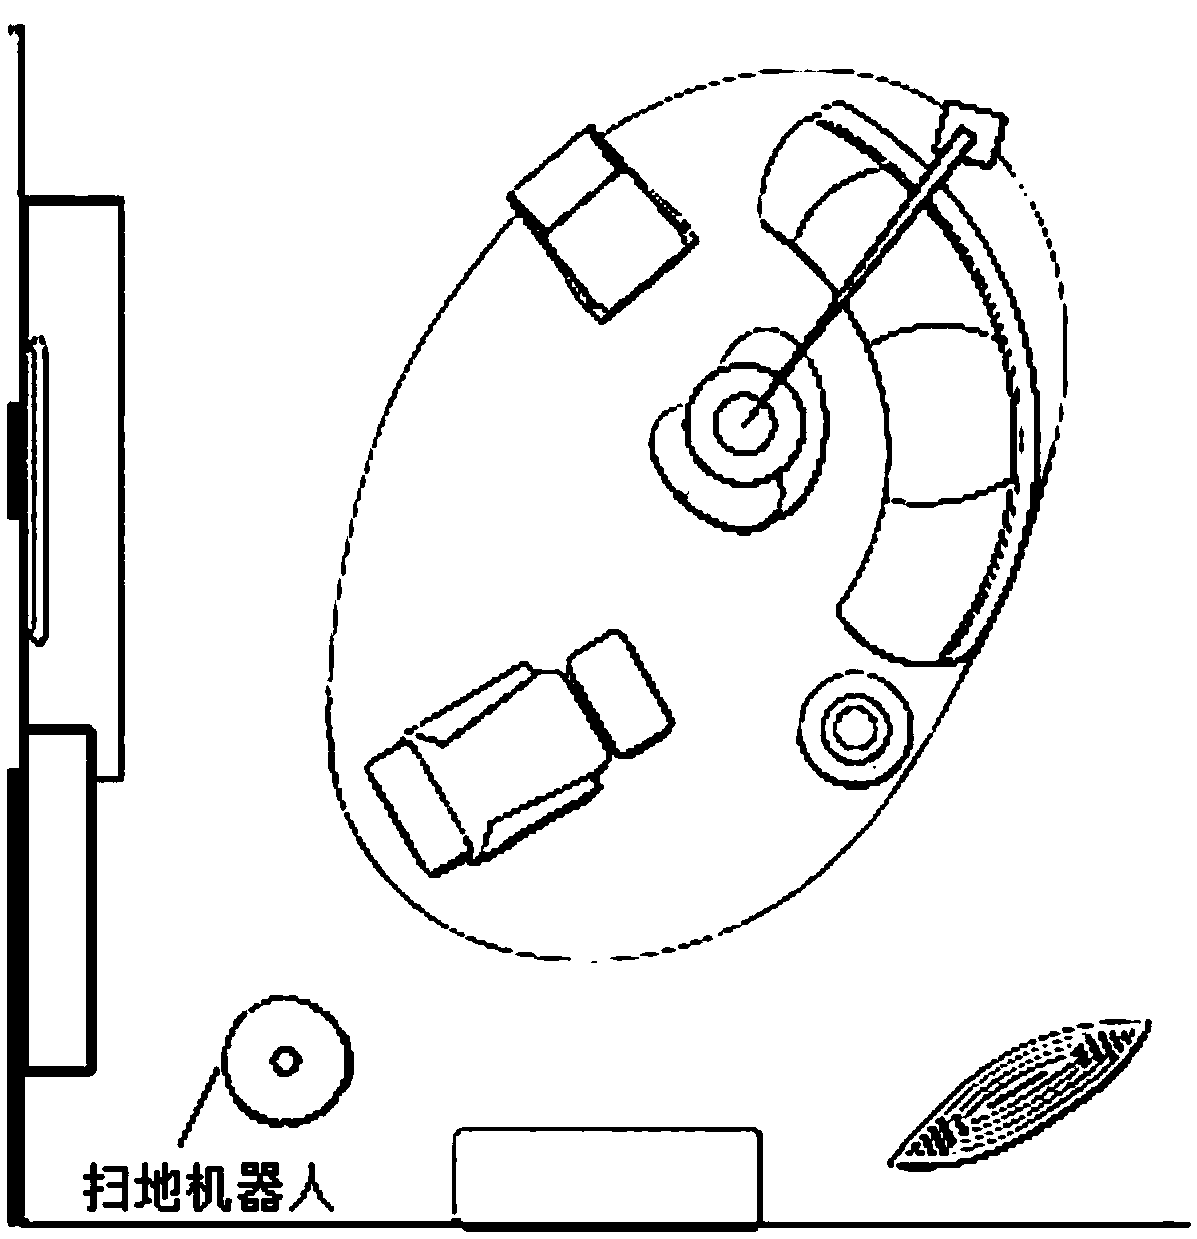 Control method and device of sweeping robot